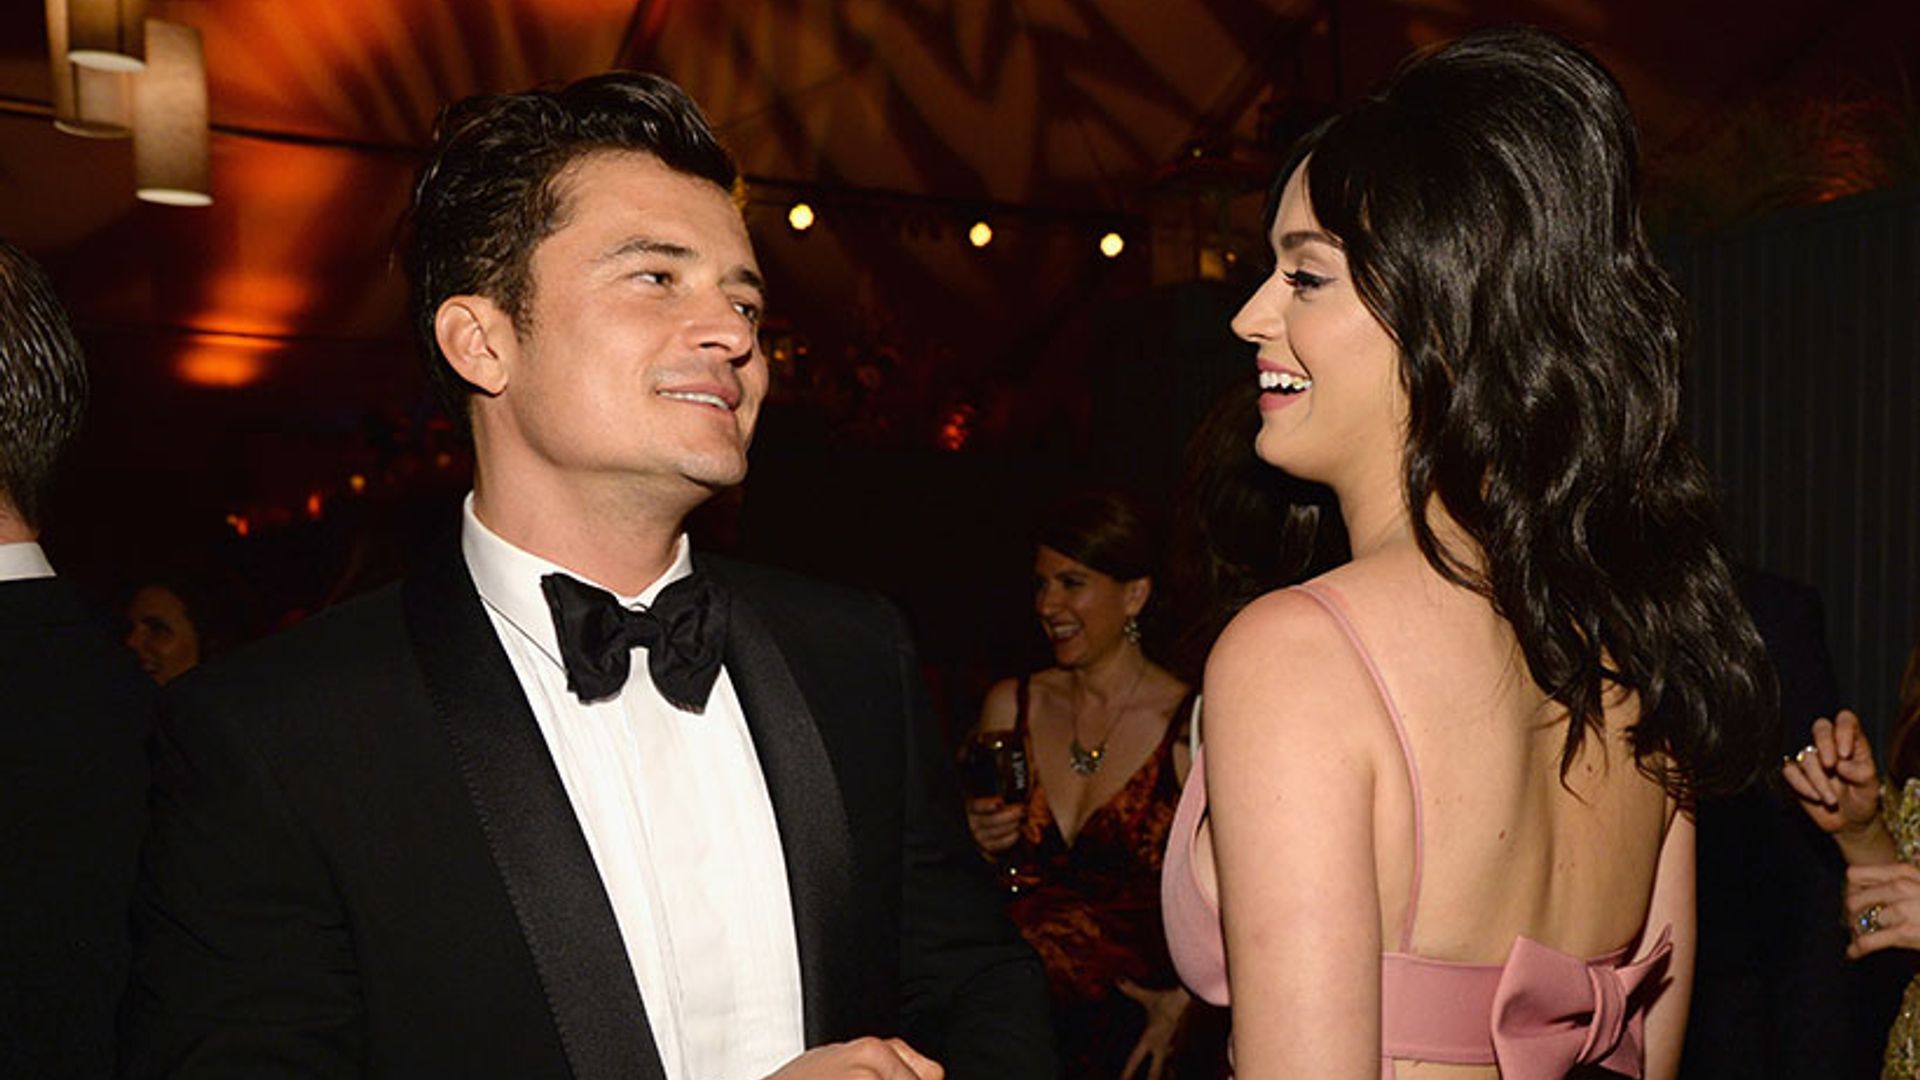 Katy Perry laughing with Orlando Bloom